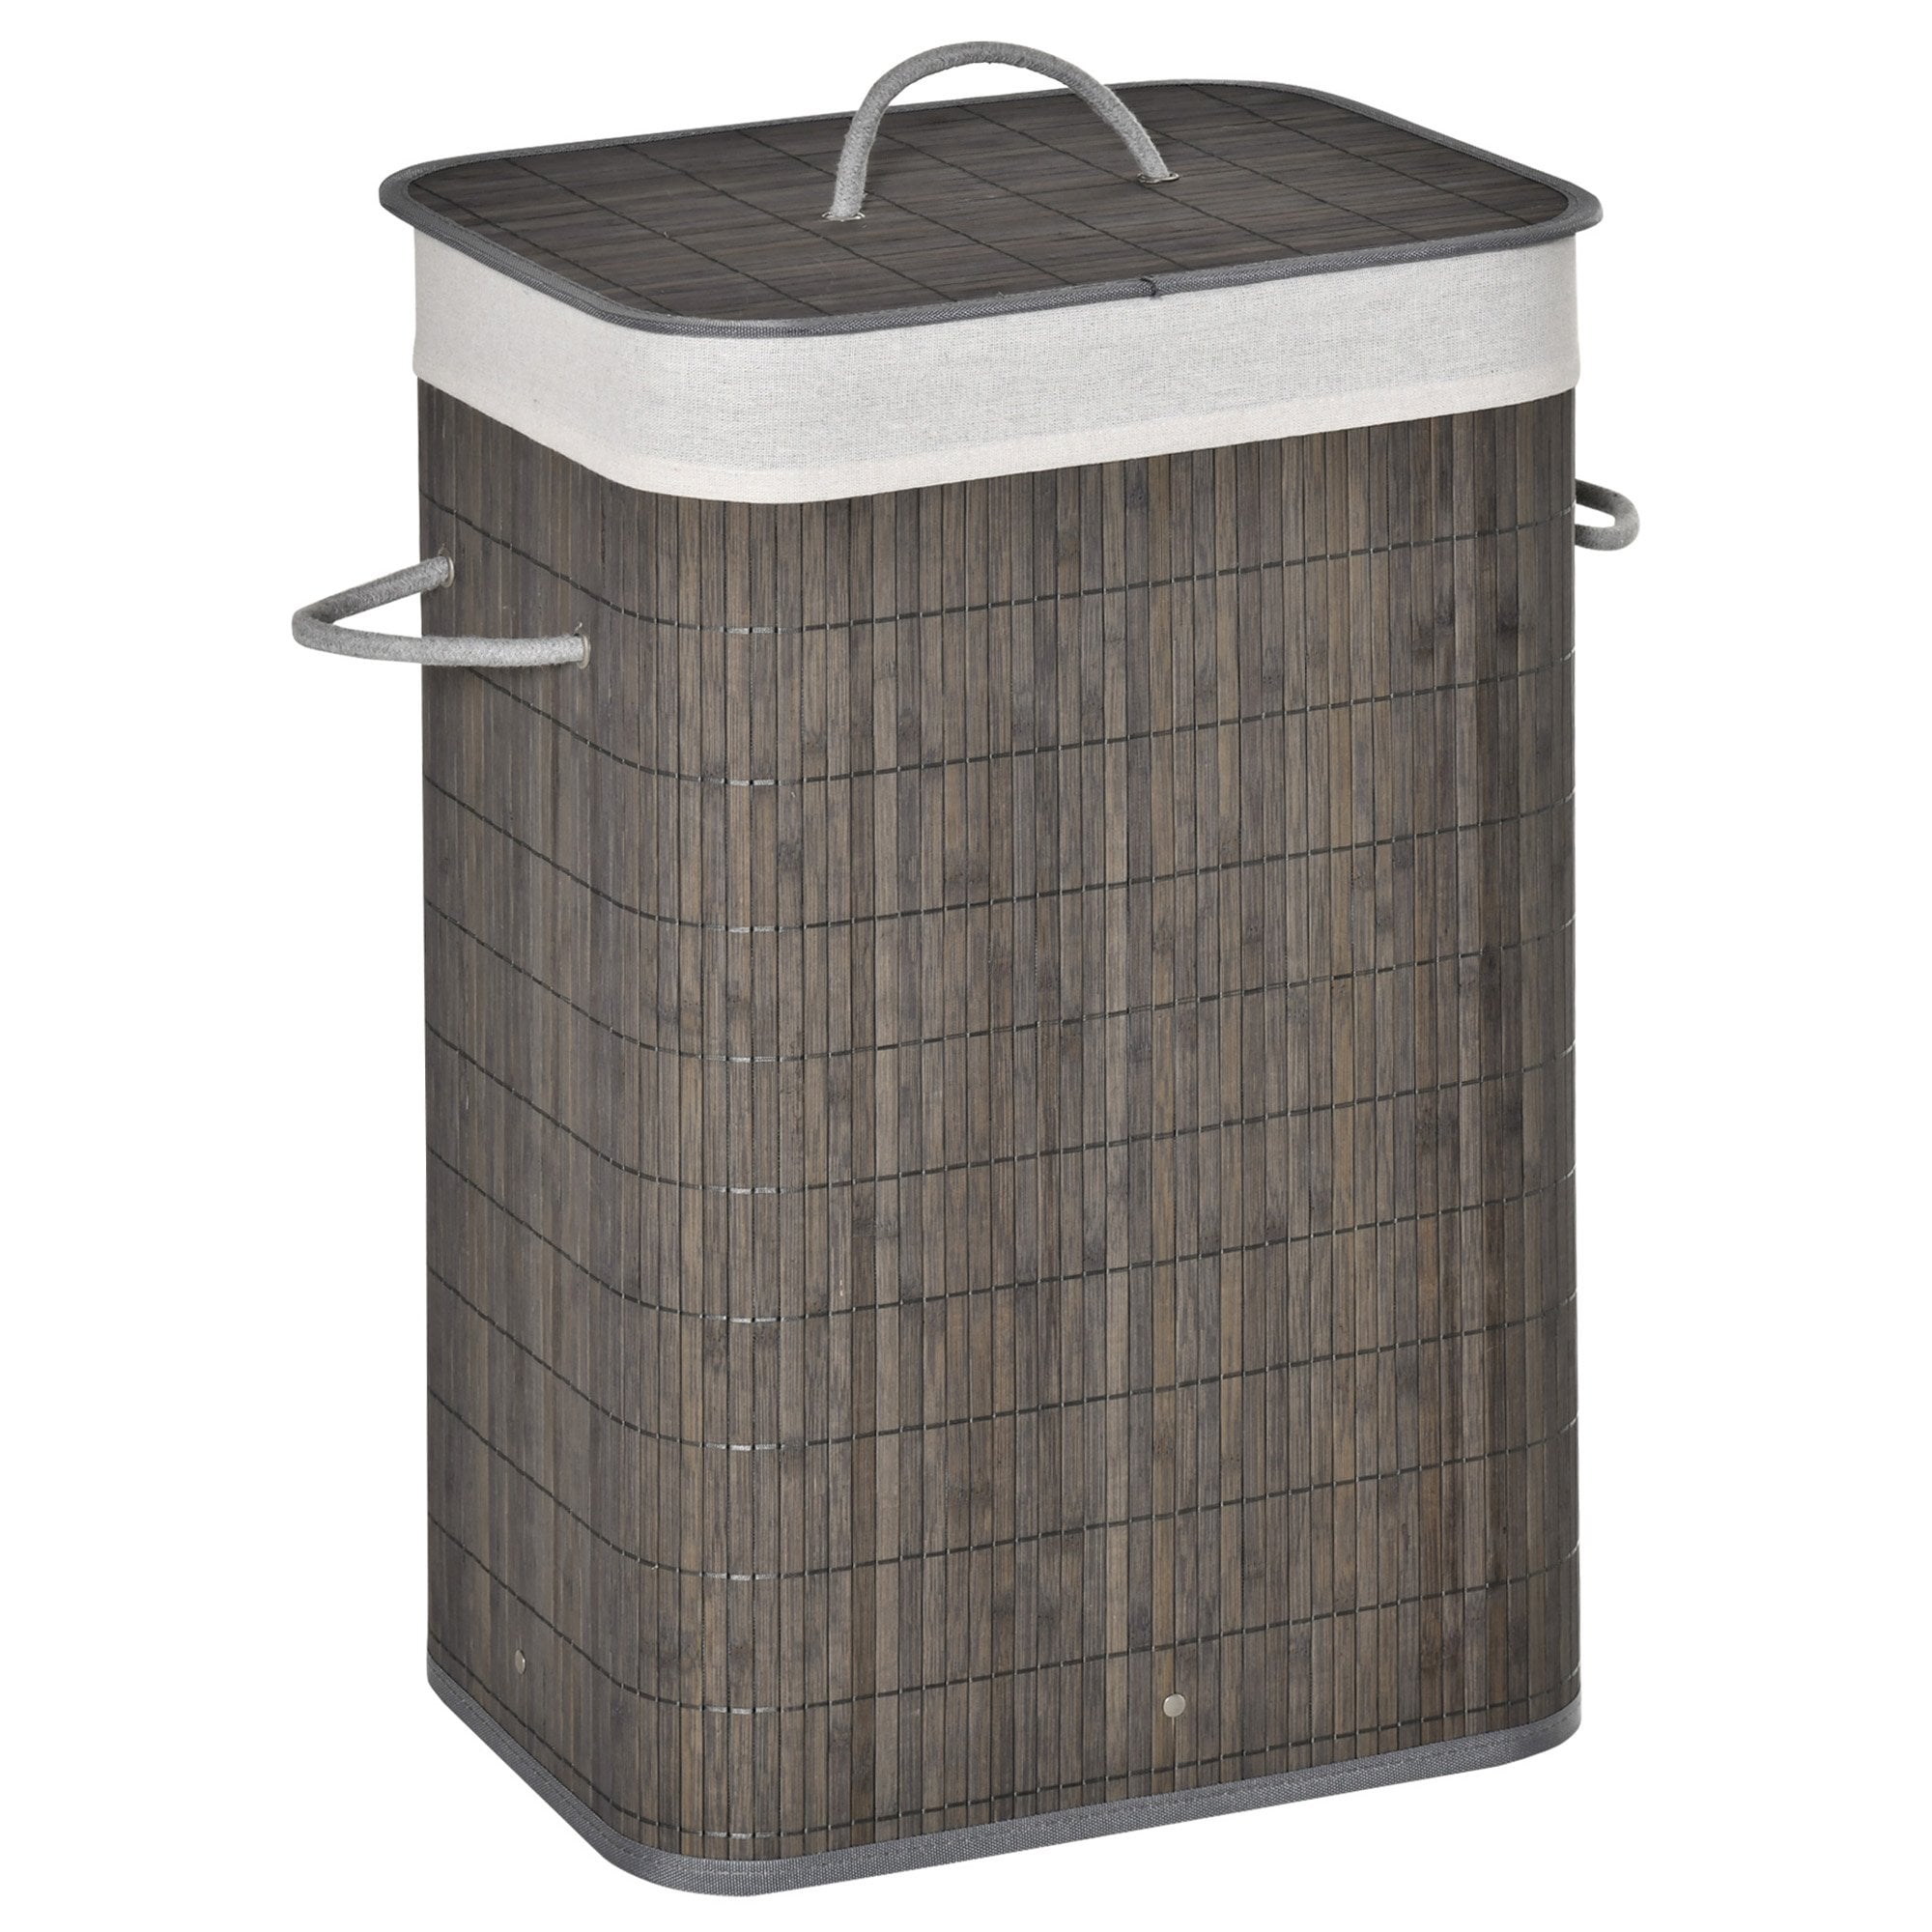 Bamboo Laundry Basket with Flip Lid and String Handles - Collapsible Hamper Removable Lining Board Base Foldable Water-Resistant Dirty Clothes Storage